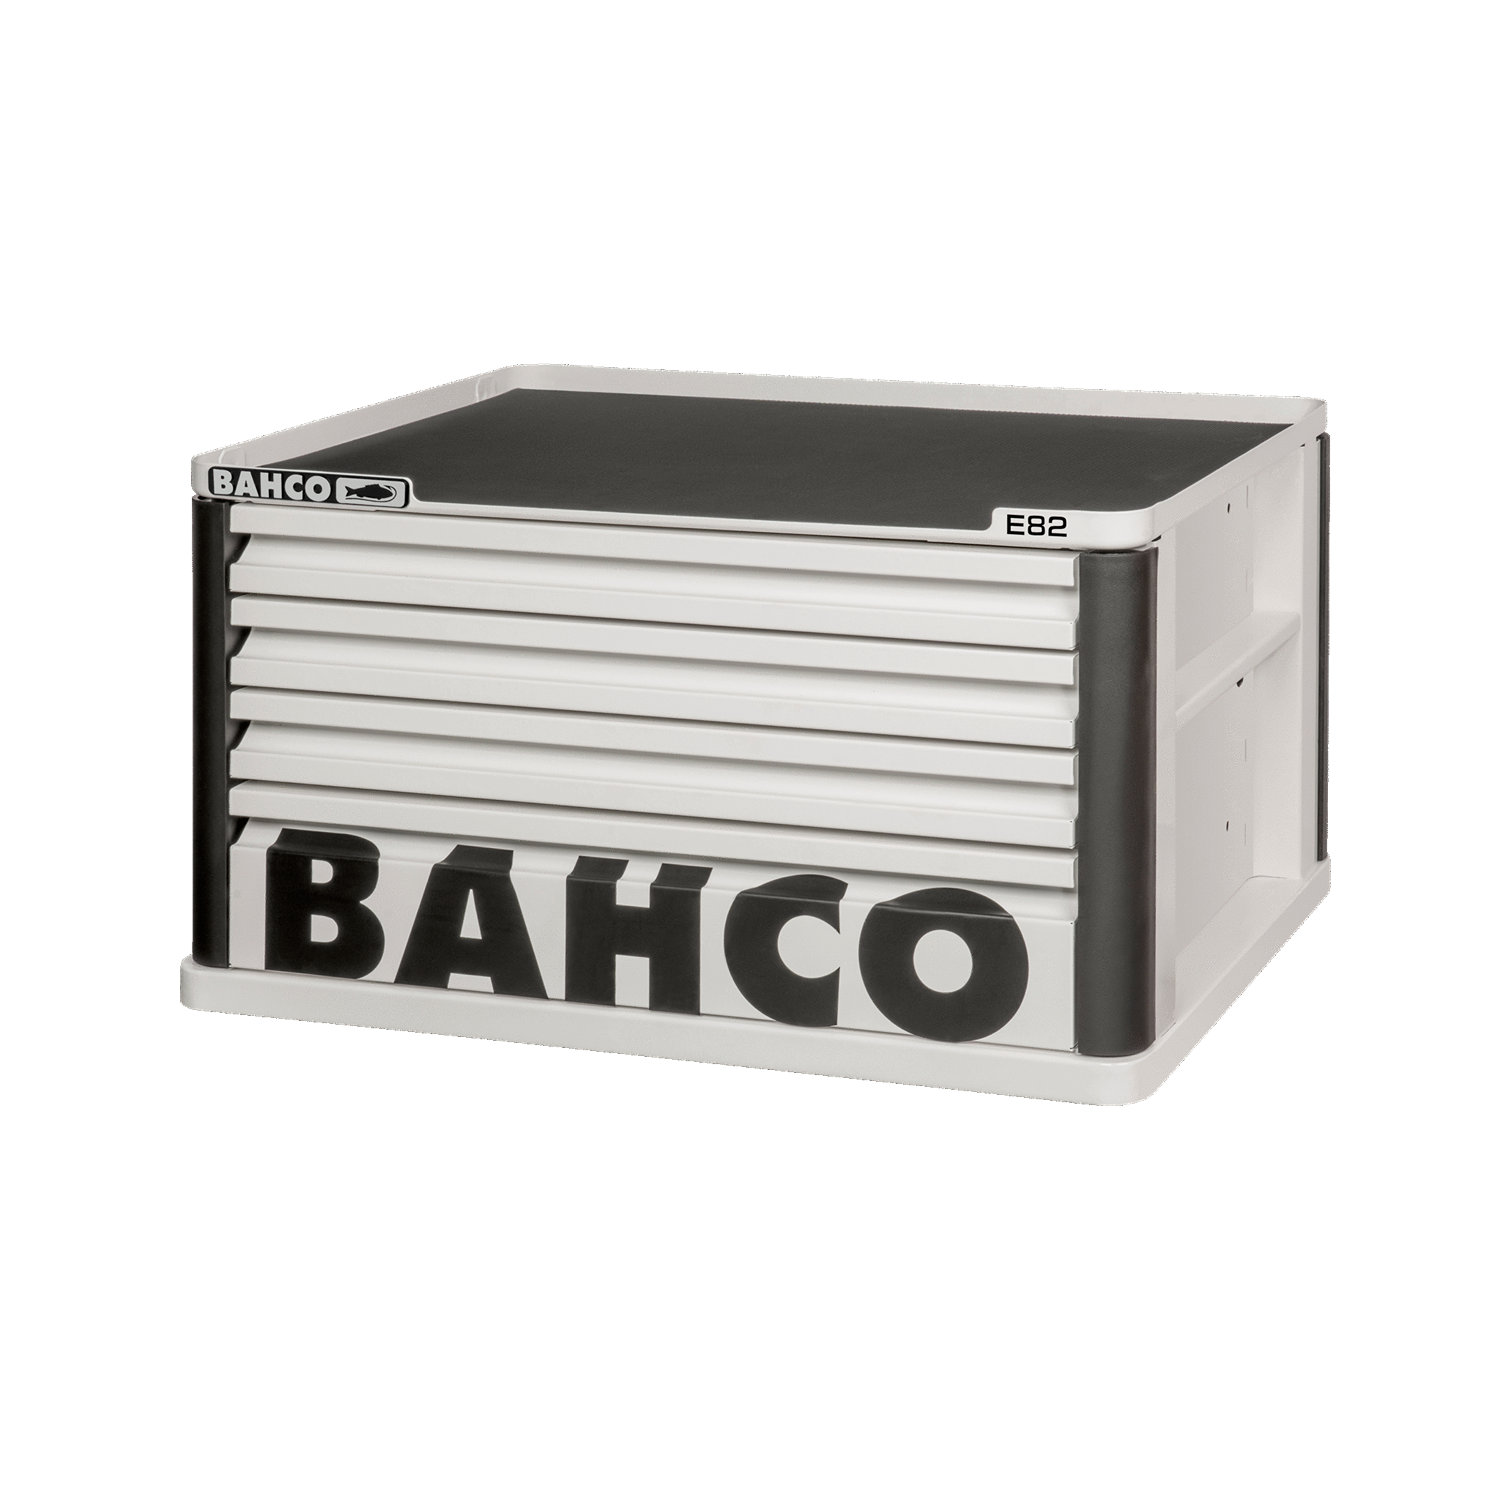 BAHCO 1482K4 26” E72 Storage HUB Top Chests with 4 Drawers - Premium Storage HUB from BAHCO - Shop now at Yew Aik.